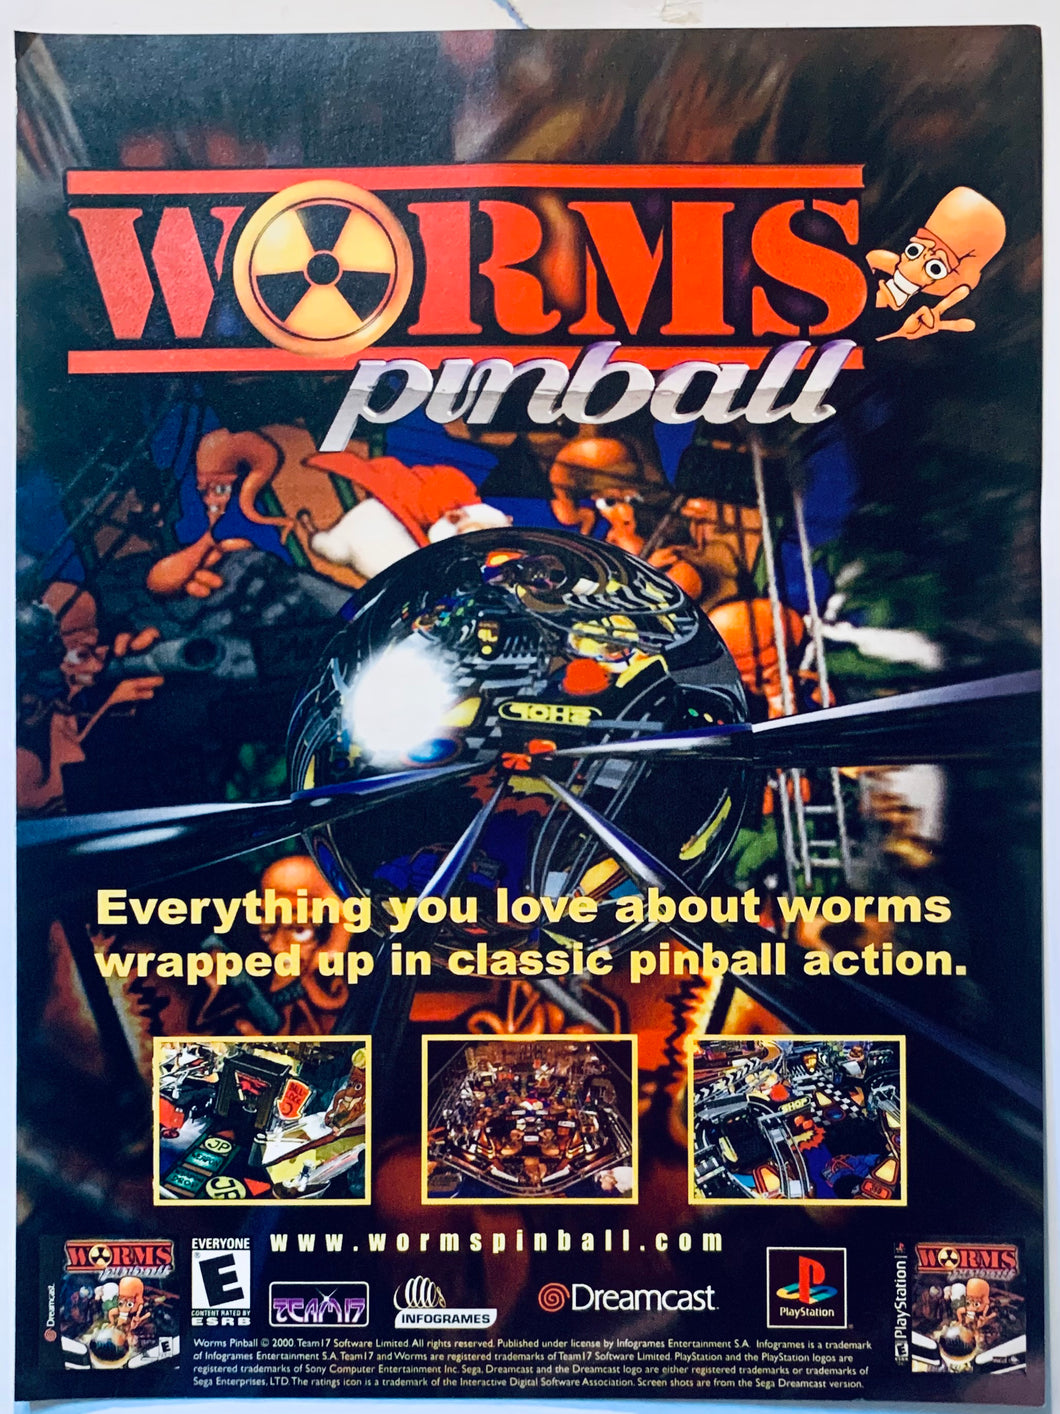 Worms Pinball - PlayStation Dreamcast - Original Vintage Advertisement - Print Ads - Laminated A4 Poster